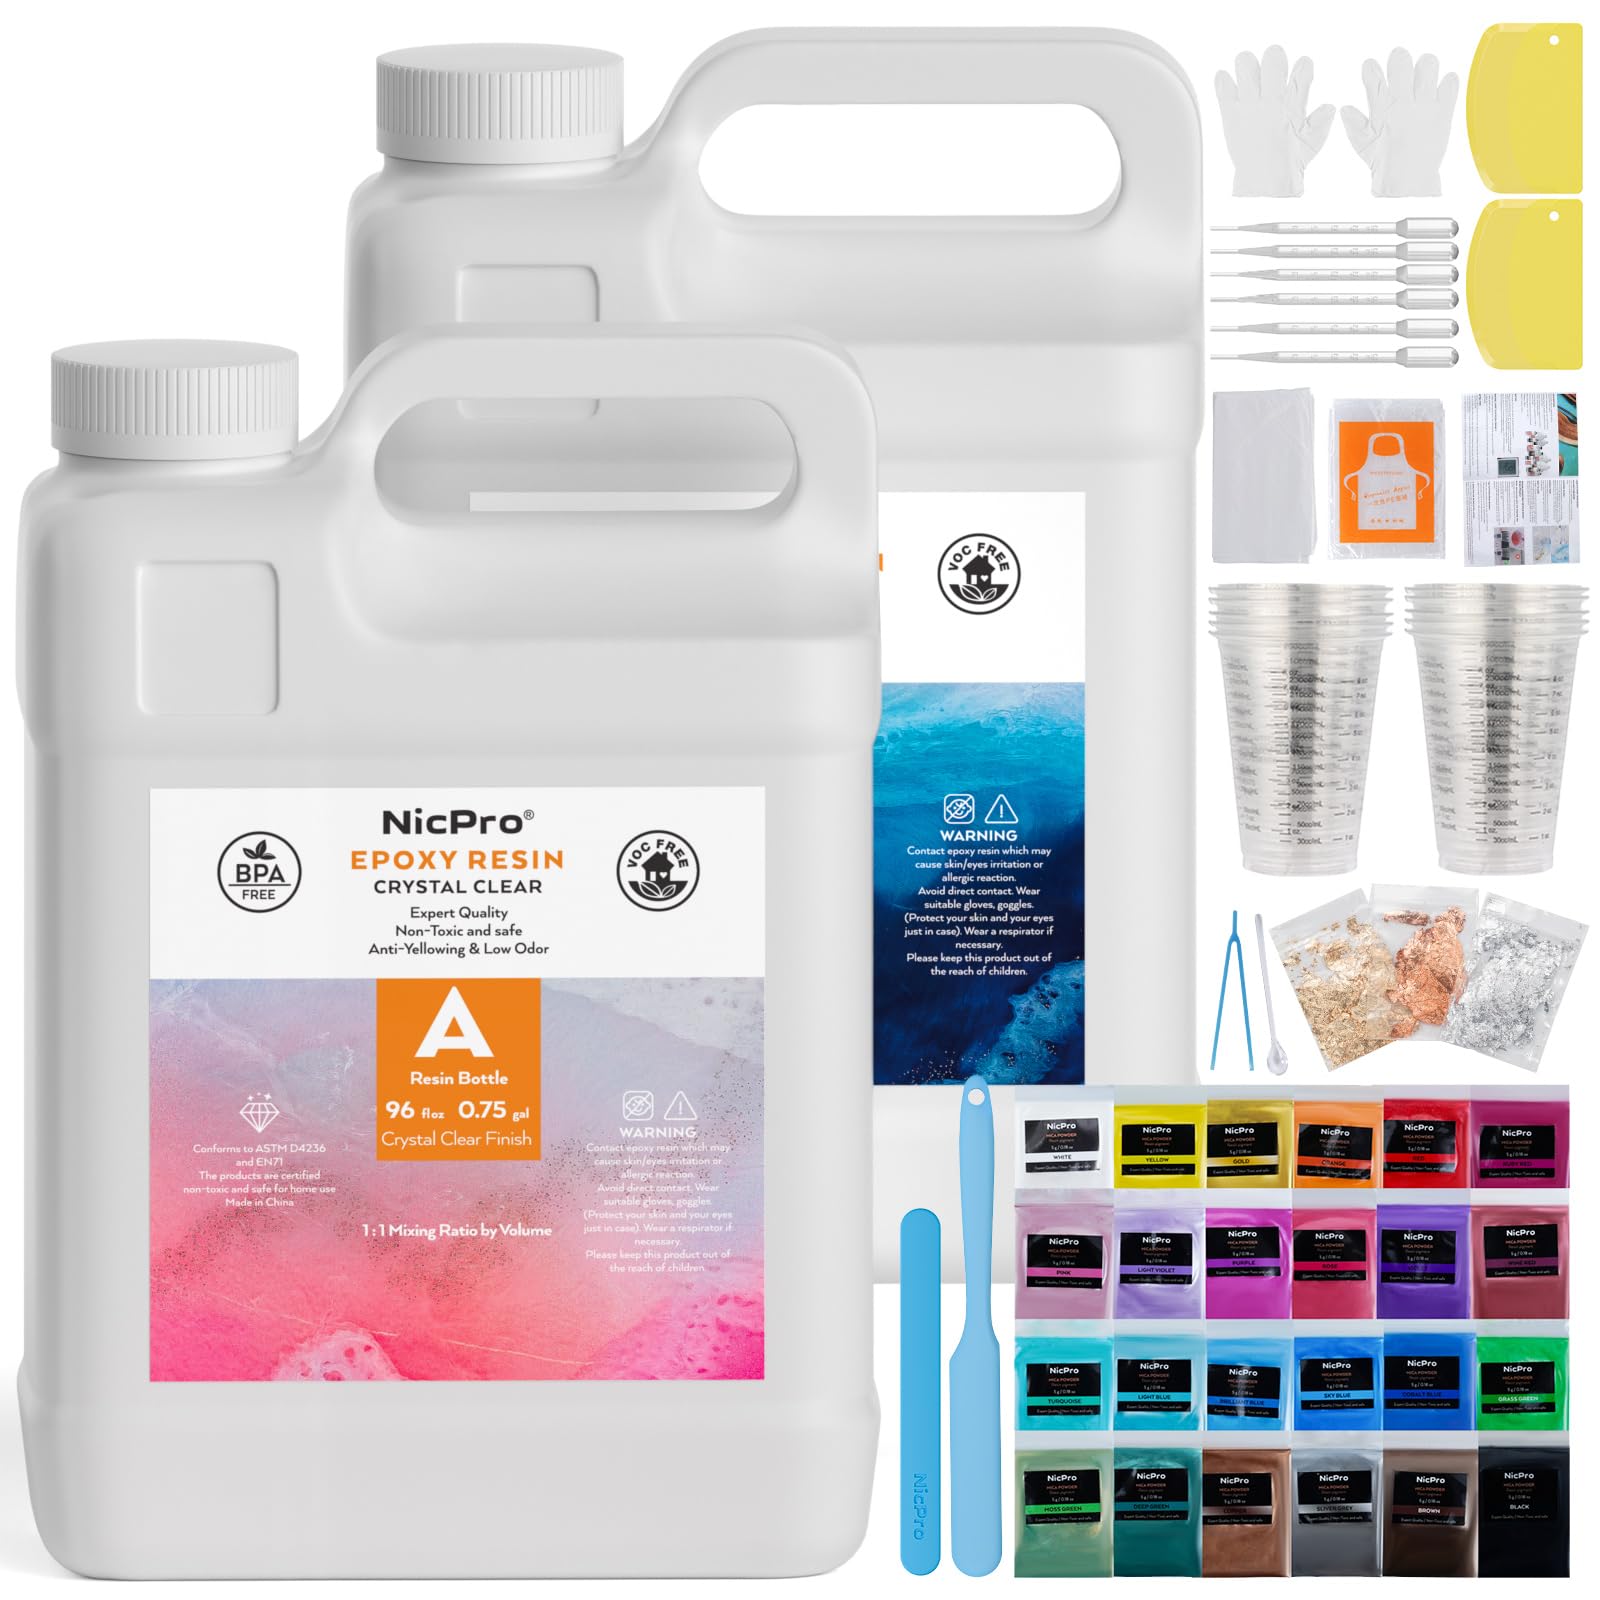 Art spiration Crystal Clear Epoxy Resin Kit for Beginners 16 oz, Art Epoxy Resin Kit with Mica Powder, Resin Pigment, Silicone Molds, Crushed Glass, R